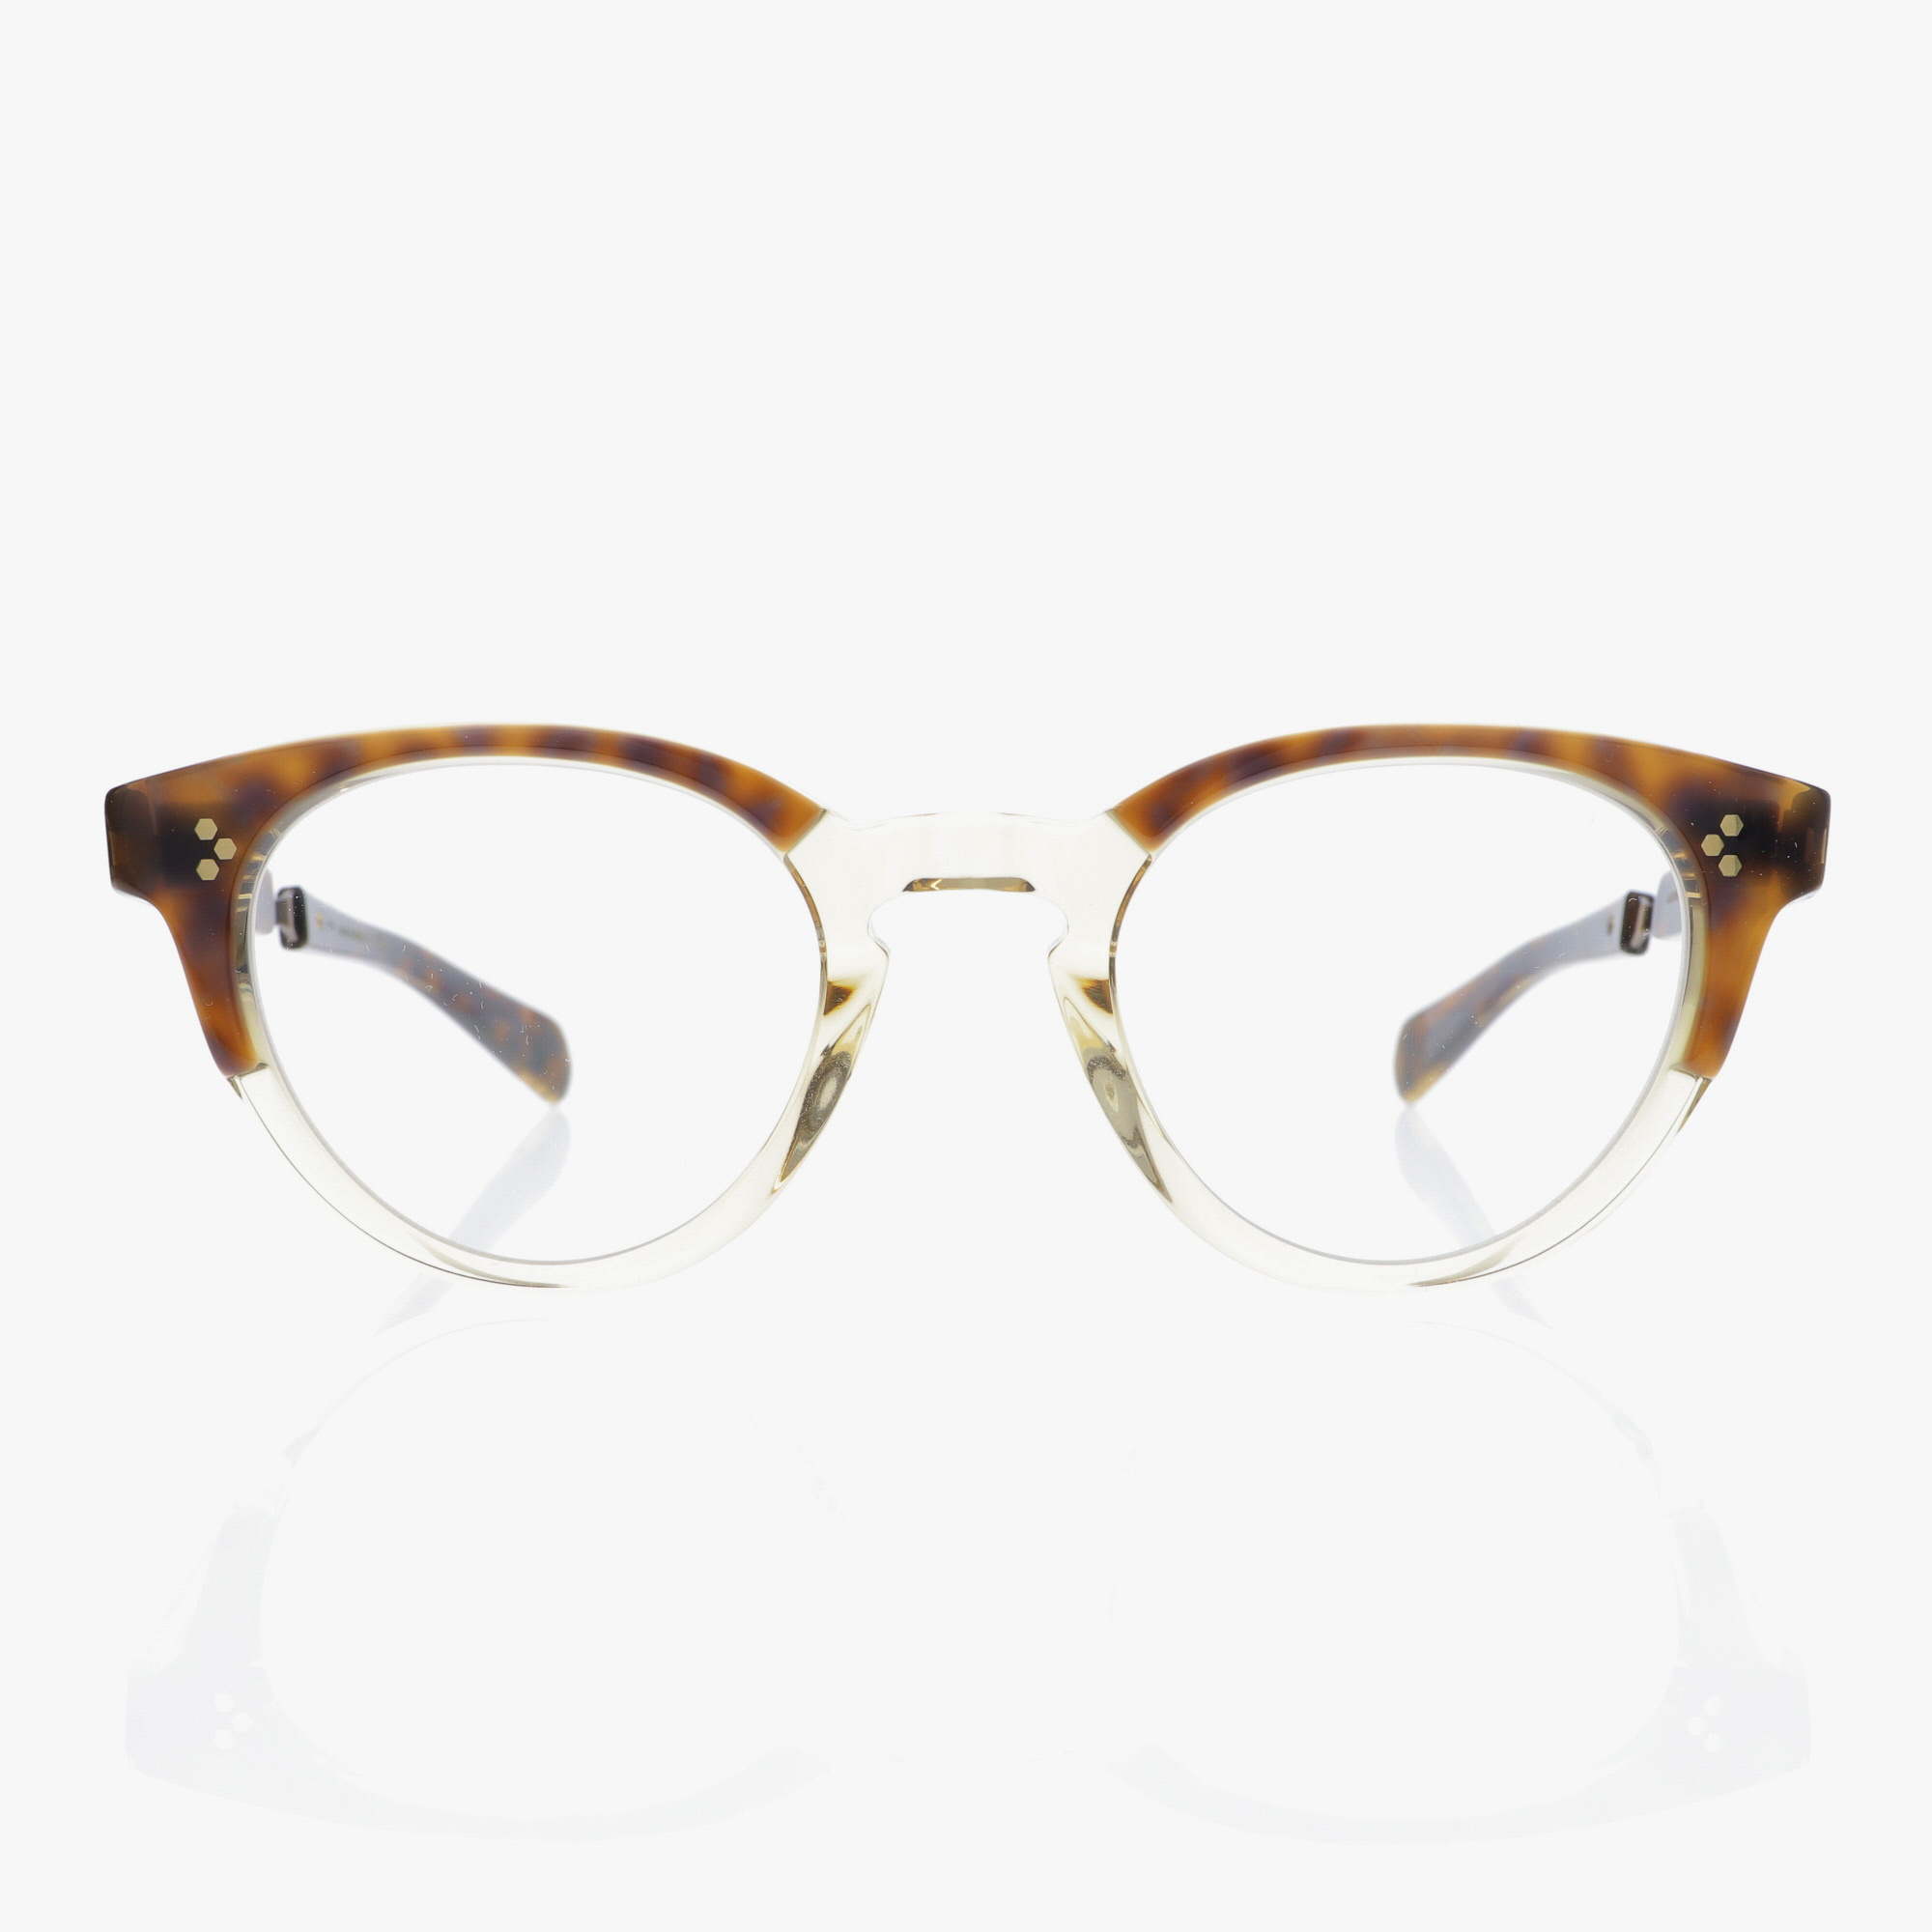 MR. LEIGHT / AUDREY C / CROWN SHELL - ANTIQUE GOLD